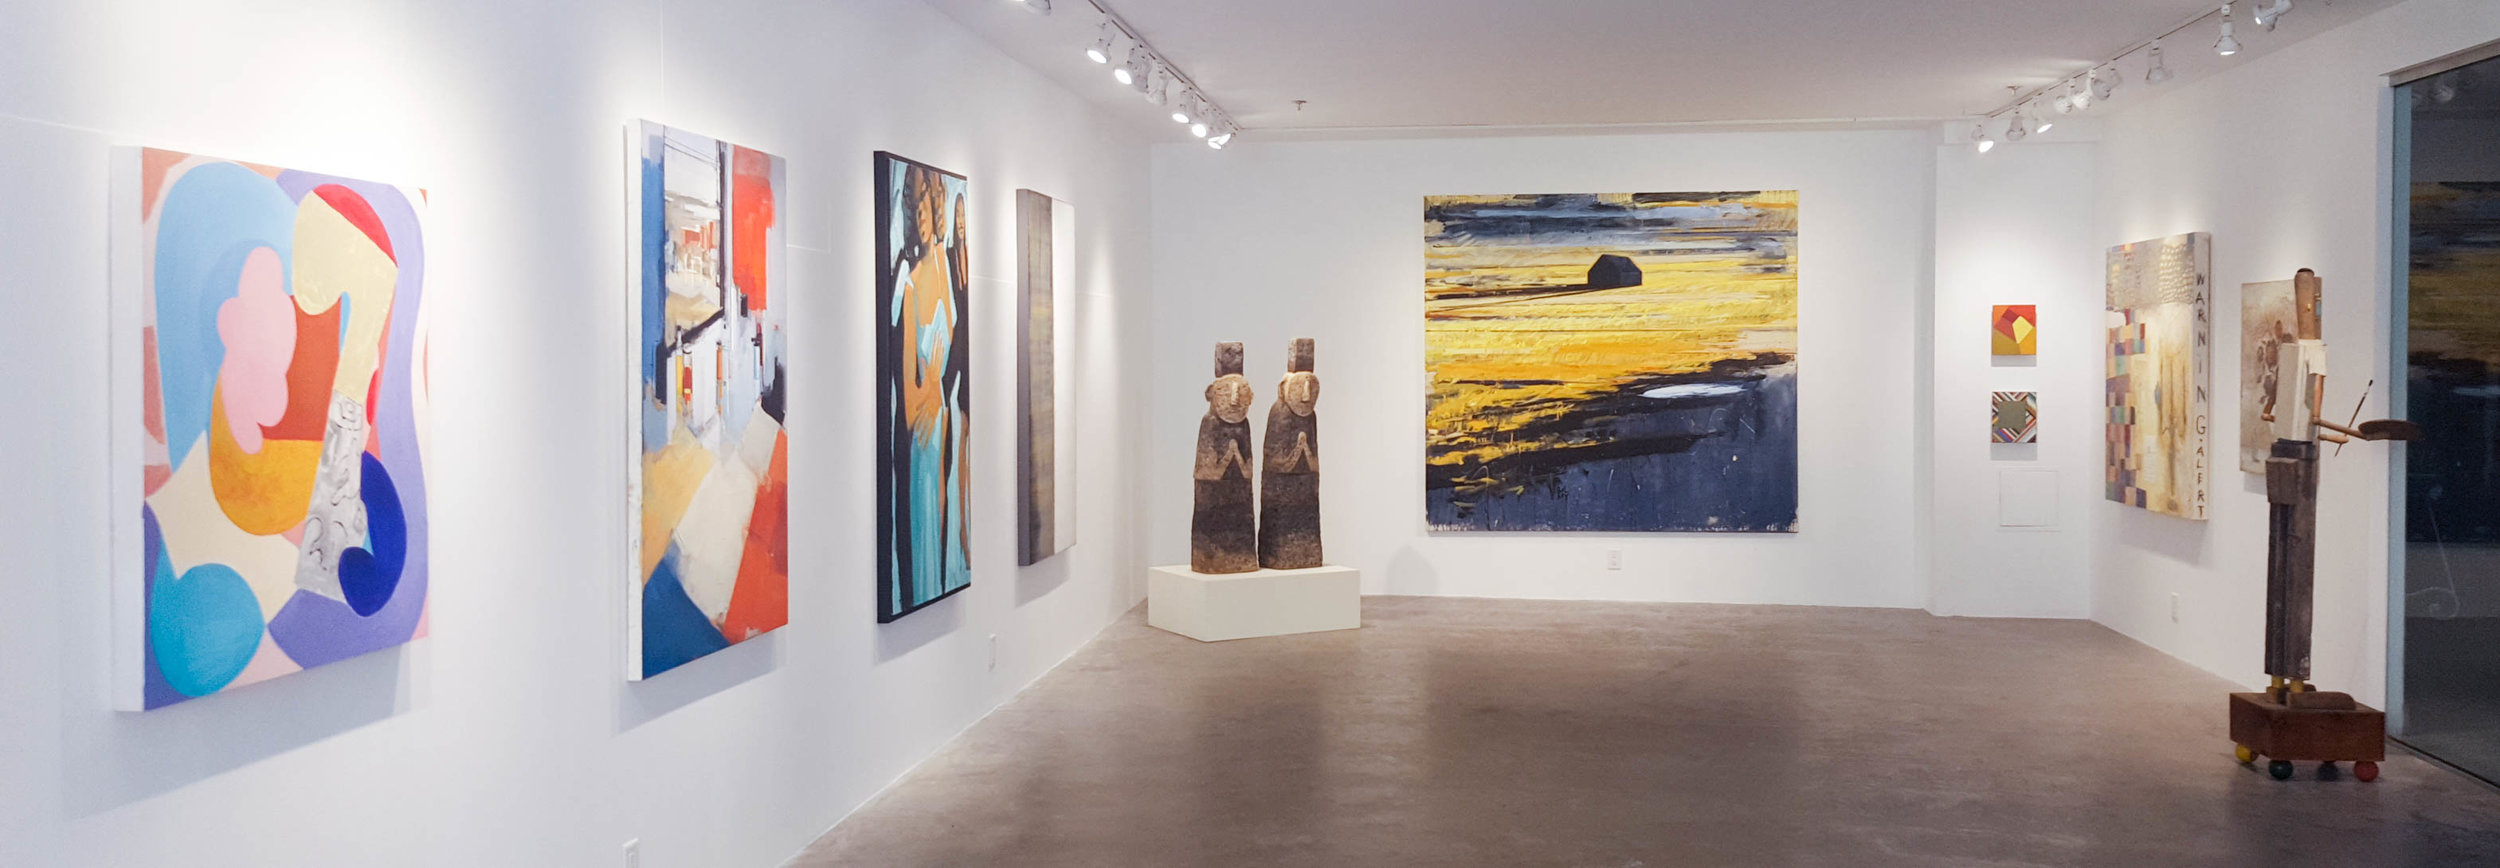 Abigail Ogilvy Gallery | Meredyth Hyatt Moses: An Eclectic View